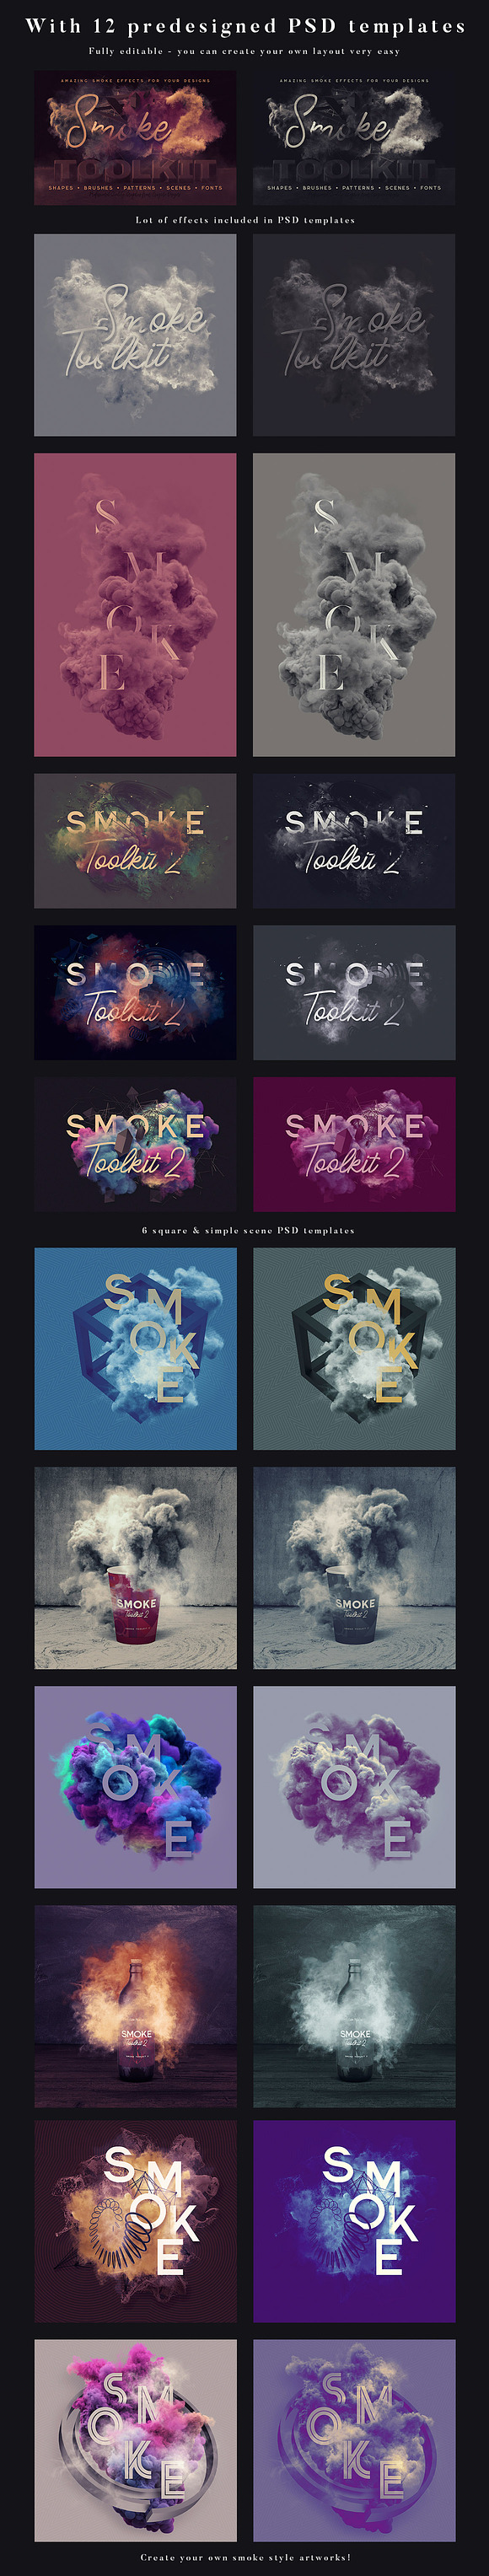 Smoke Toolkit 2 in Graphics - product preview 5